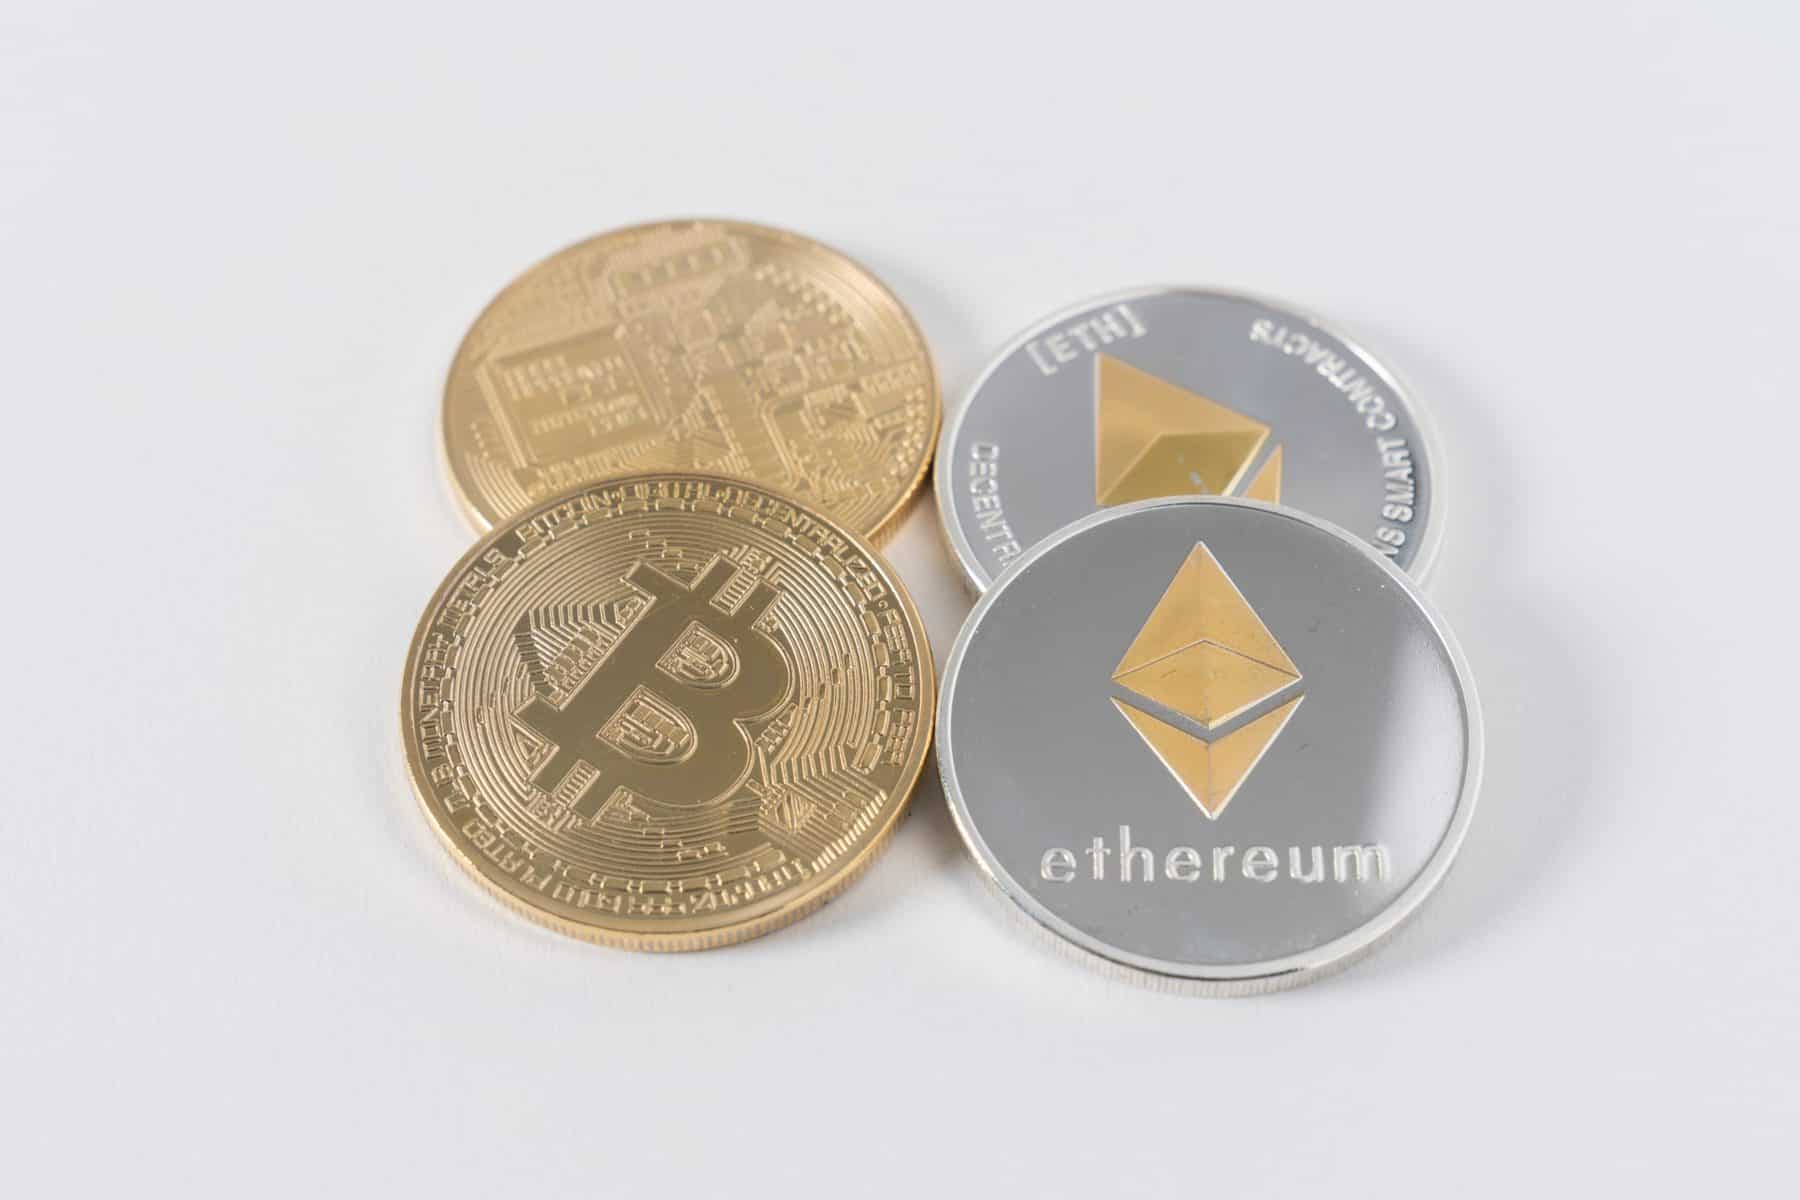 Bitcoin and Ether – what they might look like IRL